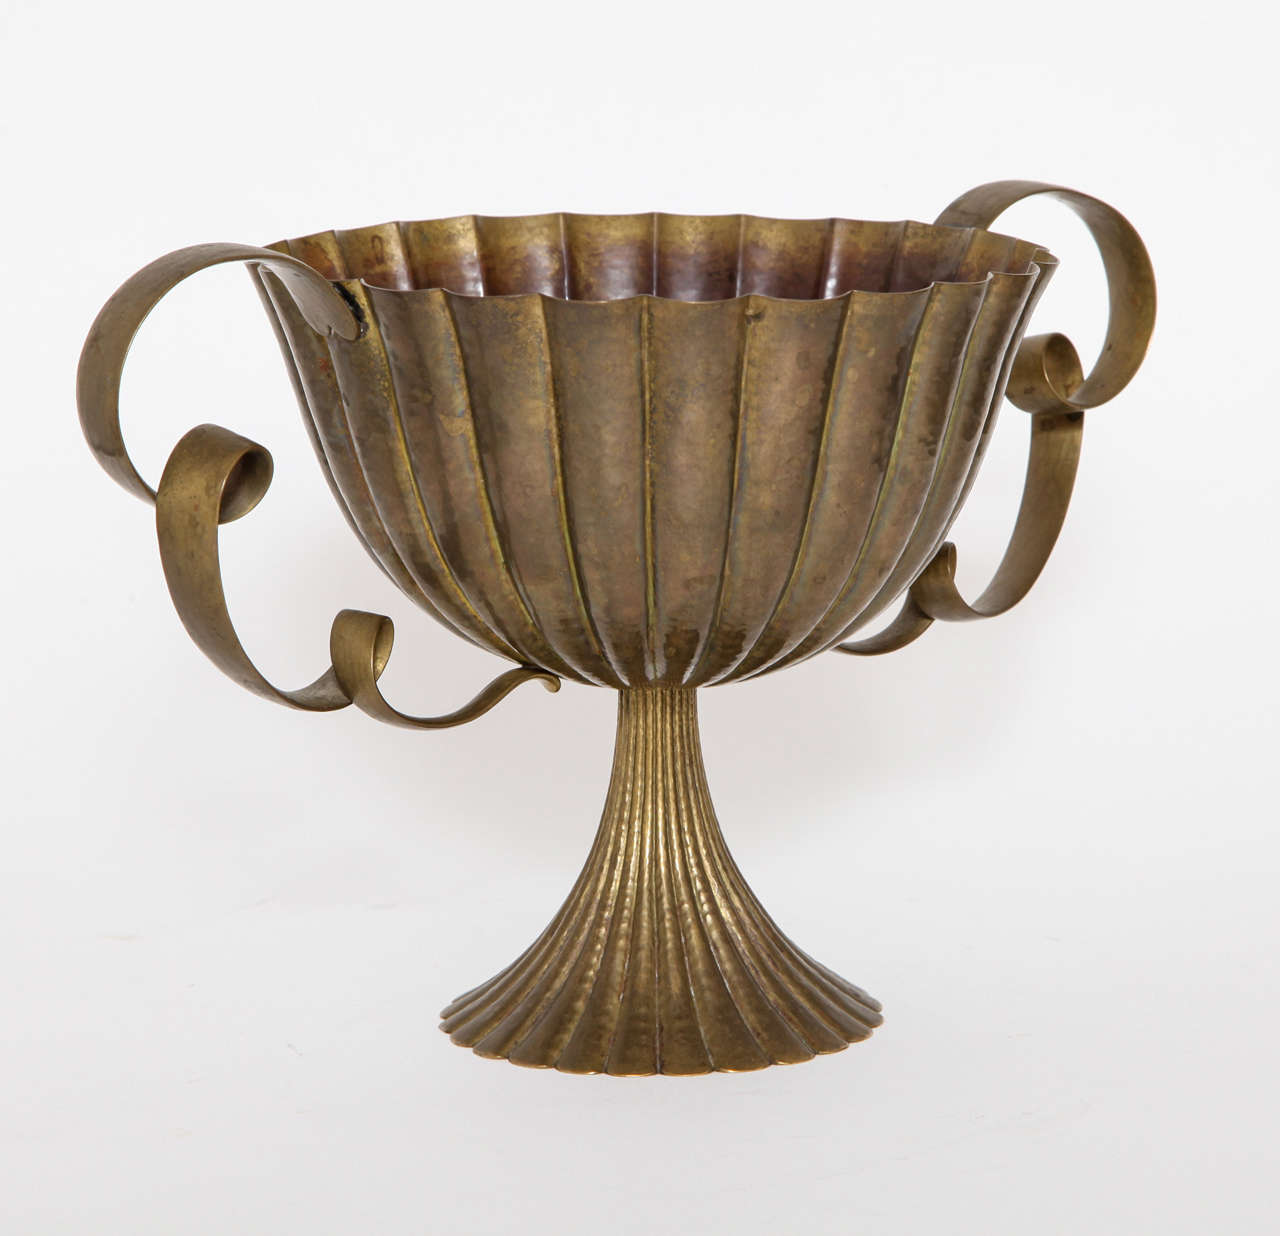 A Josef Hoffmann brass, hand-hammered two-handled bowl, executed by the Wiener Werkstatte, 1925. The hammered fluted bowl with elaborate scrolled handles and trumpet stem are in original unpolished condition. The Josef Hoffmann monogram, 
Wiener